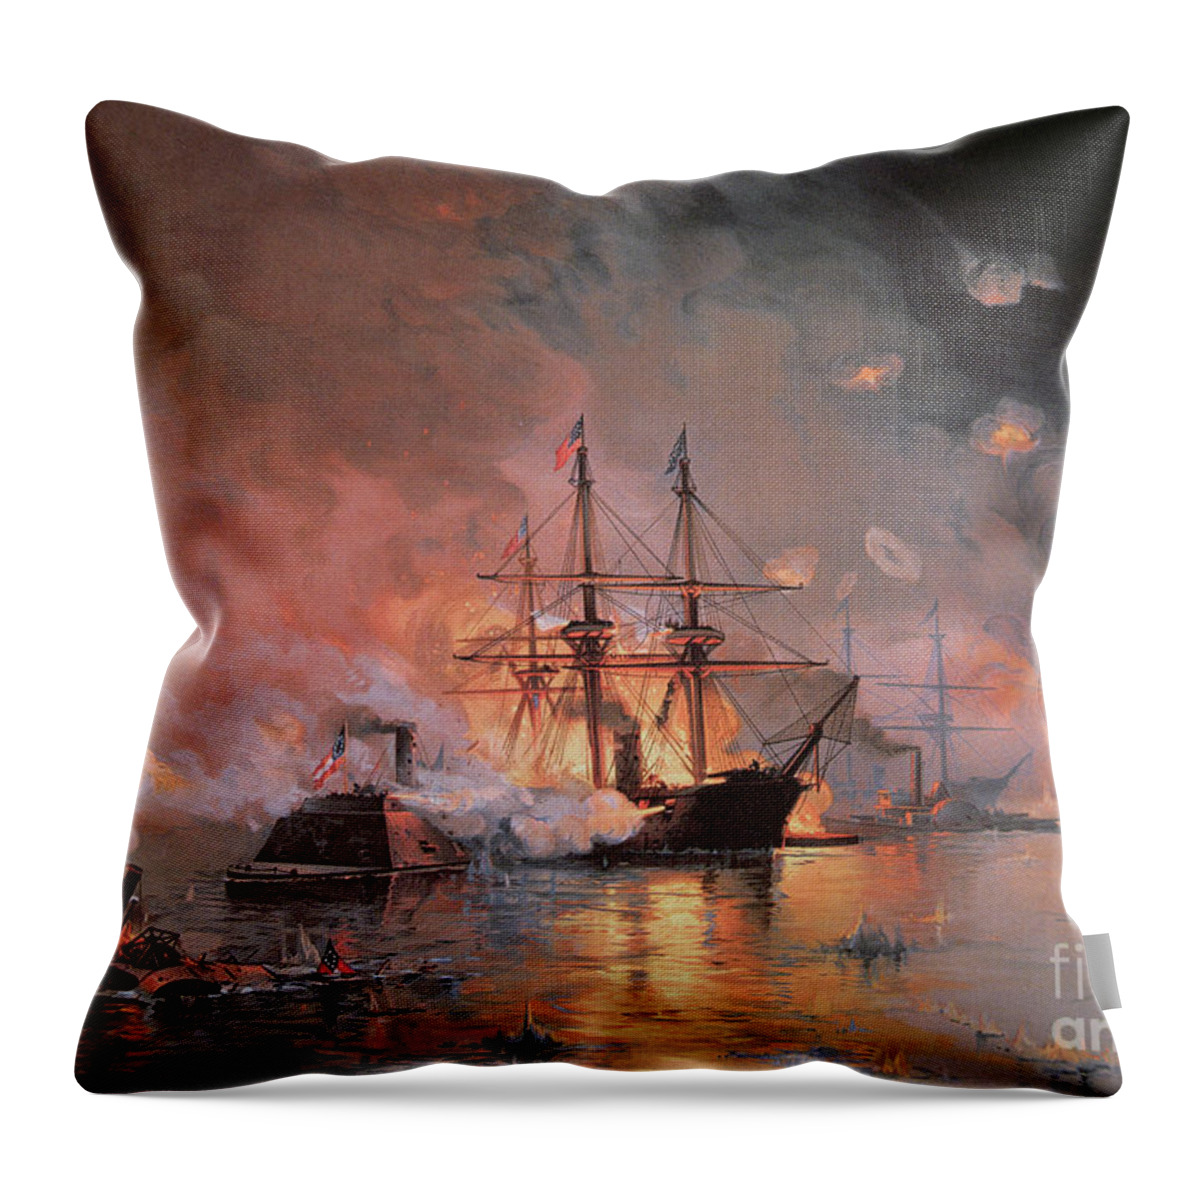 Capture Of New Orleans By Union Flag Officer David G. Farragut Throw Pillow featuring the painting Capture of New Orleans by Union Flag Officer David G Farragut by Julian Oliver Davidson